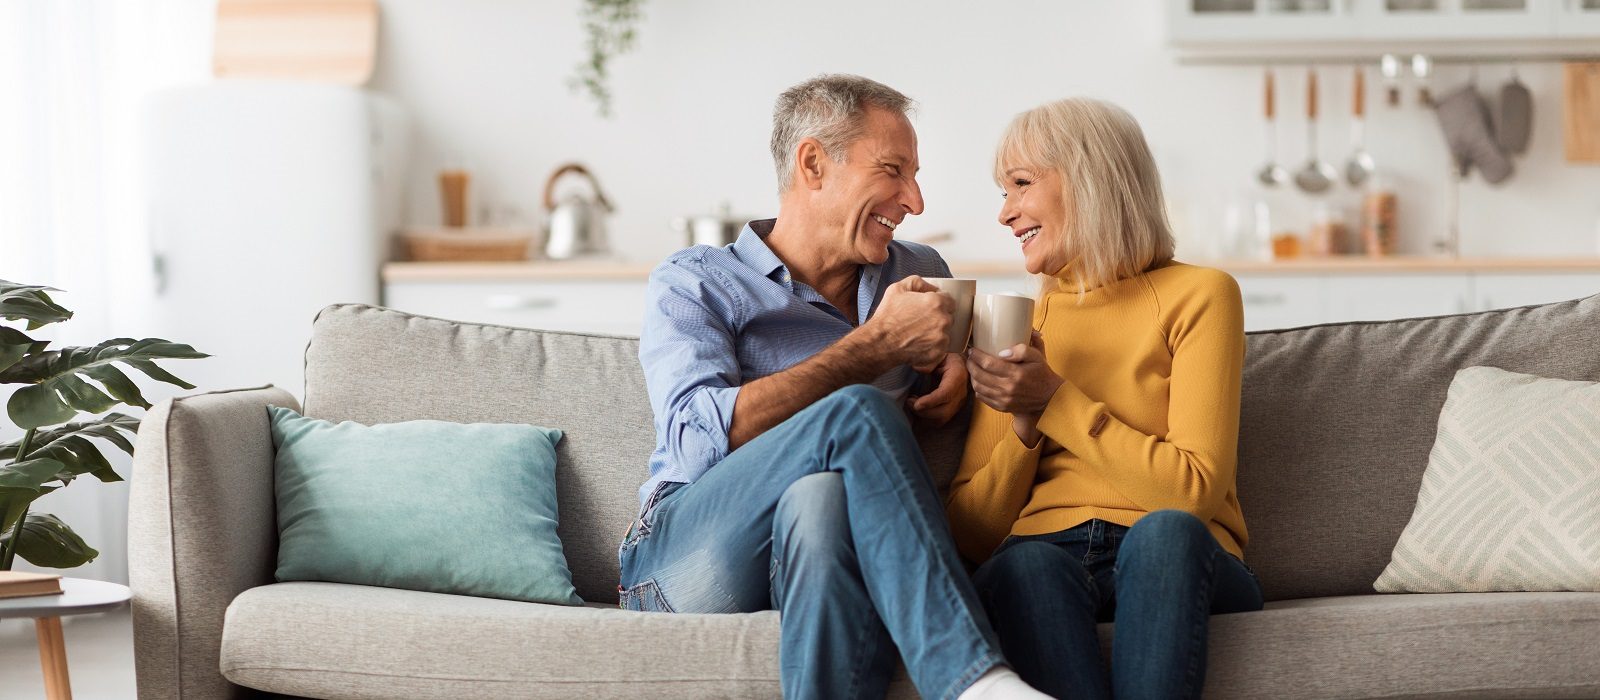 Happy Senior Couple Drinking Coffee Holding Mugs With Hot Drink And Smiling To Each Other Sitting On Couch At Home. On Weekend. Retirement Lifestyle And Happy Marriage Concept